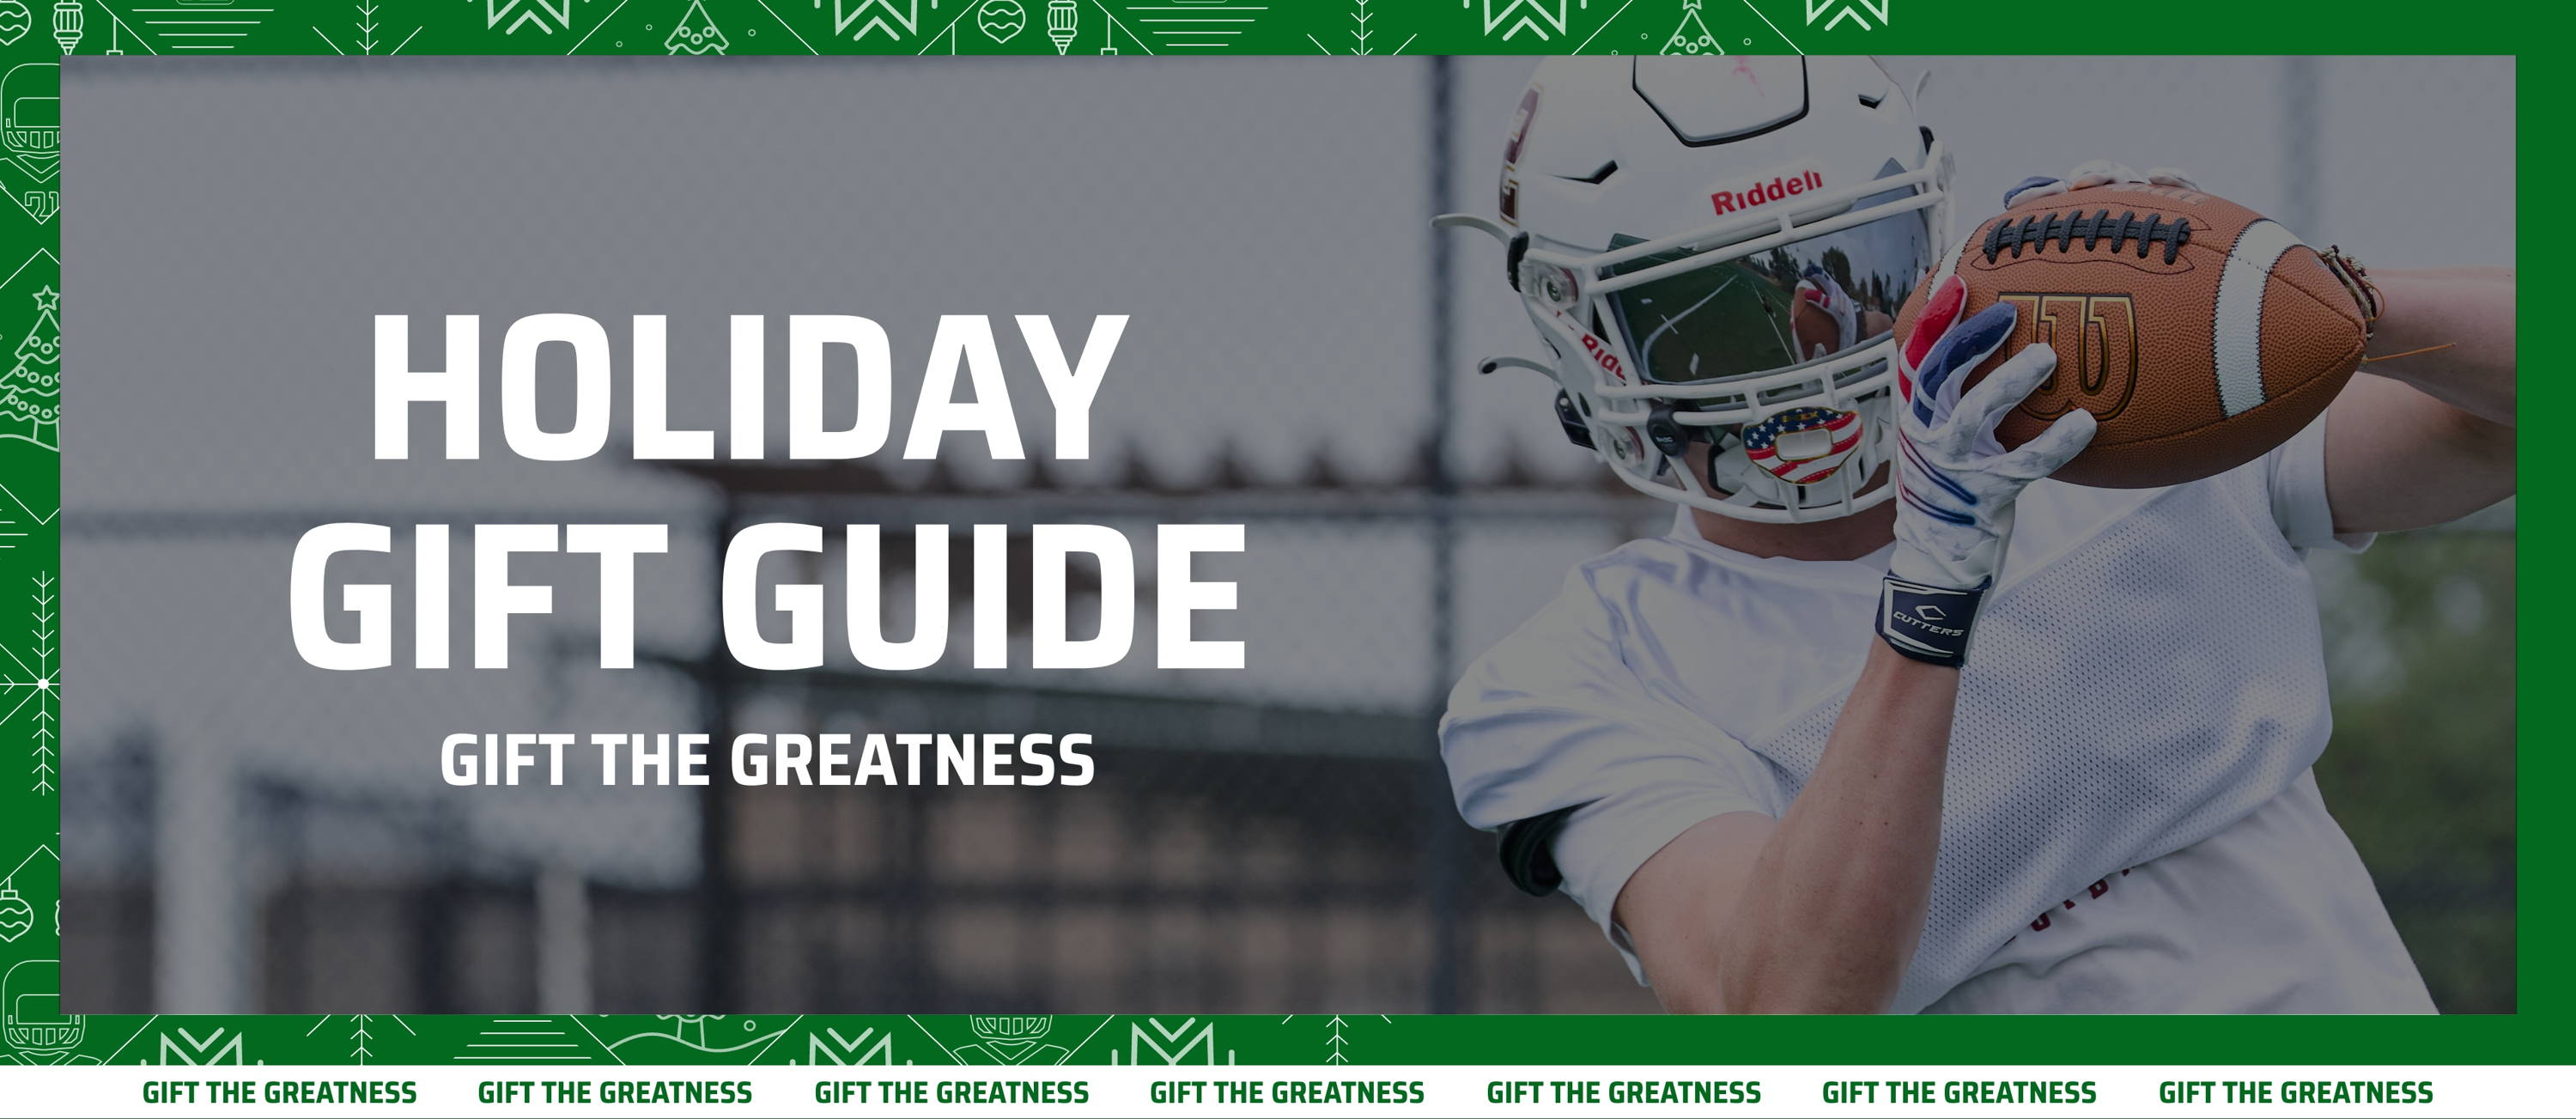 HOLIDAY GIFT GUIDE - GIFT THE GREATNESS